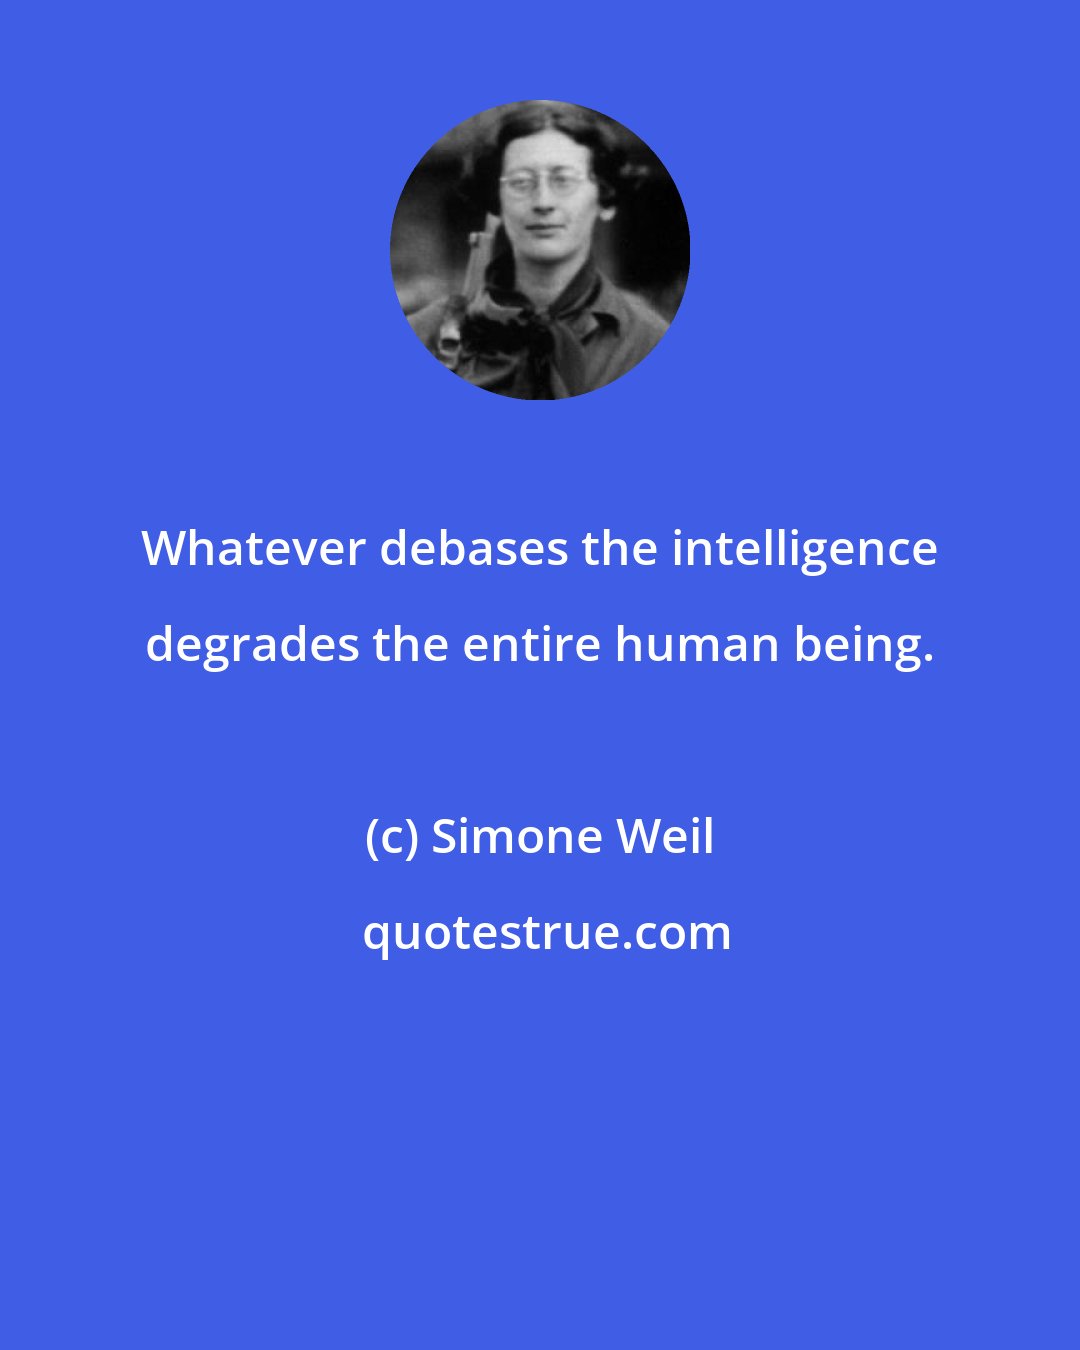 Simone Weil: Whatever debases the intelligence degrades the entire human being.